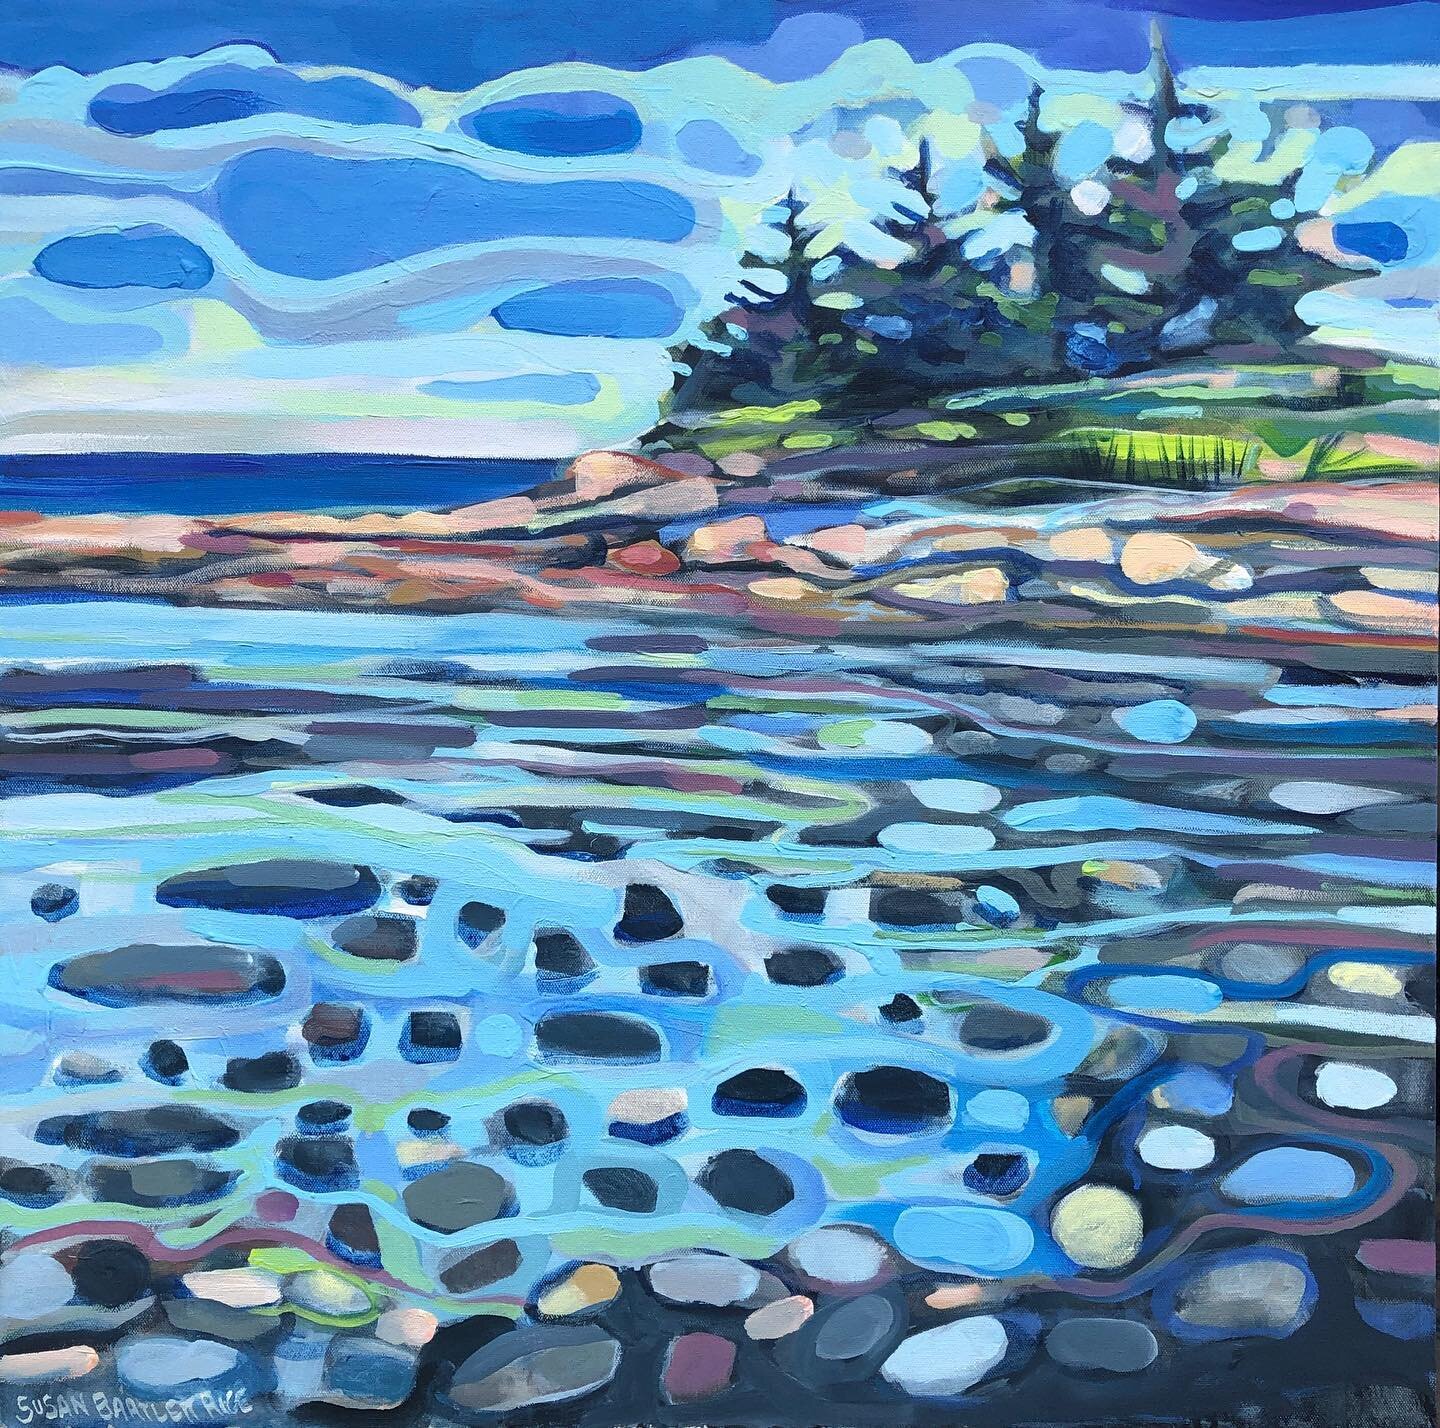 When the day is done and the rocks peek up through the surface of the tide pools 

Susan Bartlett Rice
&ldquo;Salt Marsh Evening&rdquo;
30x30
Acrylic on canvas
2023
SOLD.. thank you! 
.
From my most recent newsletter release (sign up for newsletter t